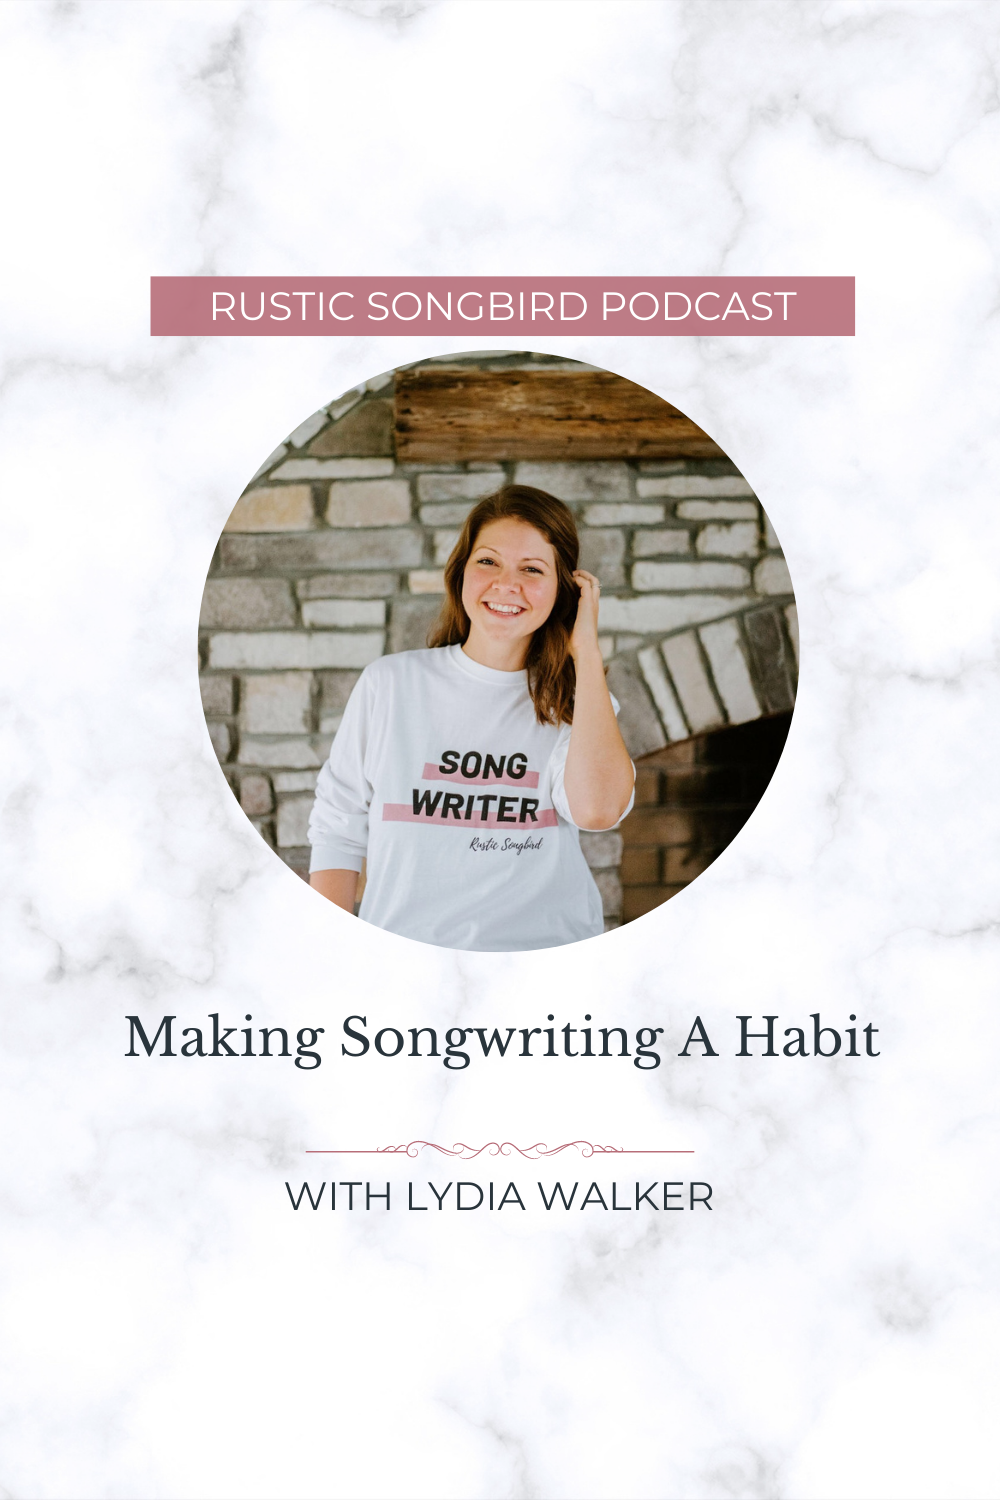 In this solo episode of the Rustic Songbird Podcast, host Lydia Walker teaches ways you can make songwriting a habit.